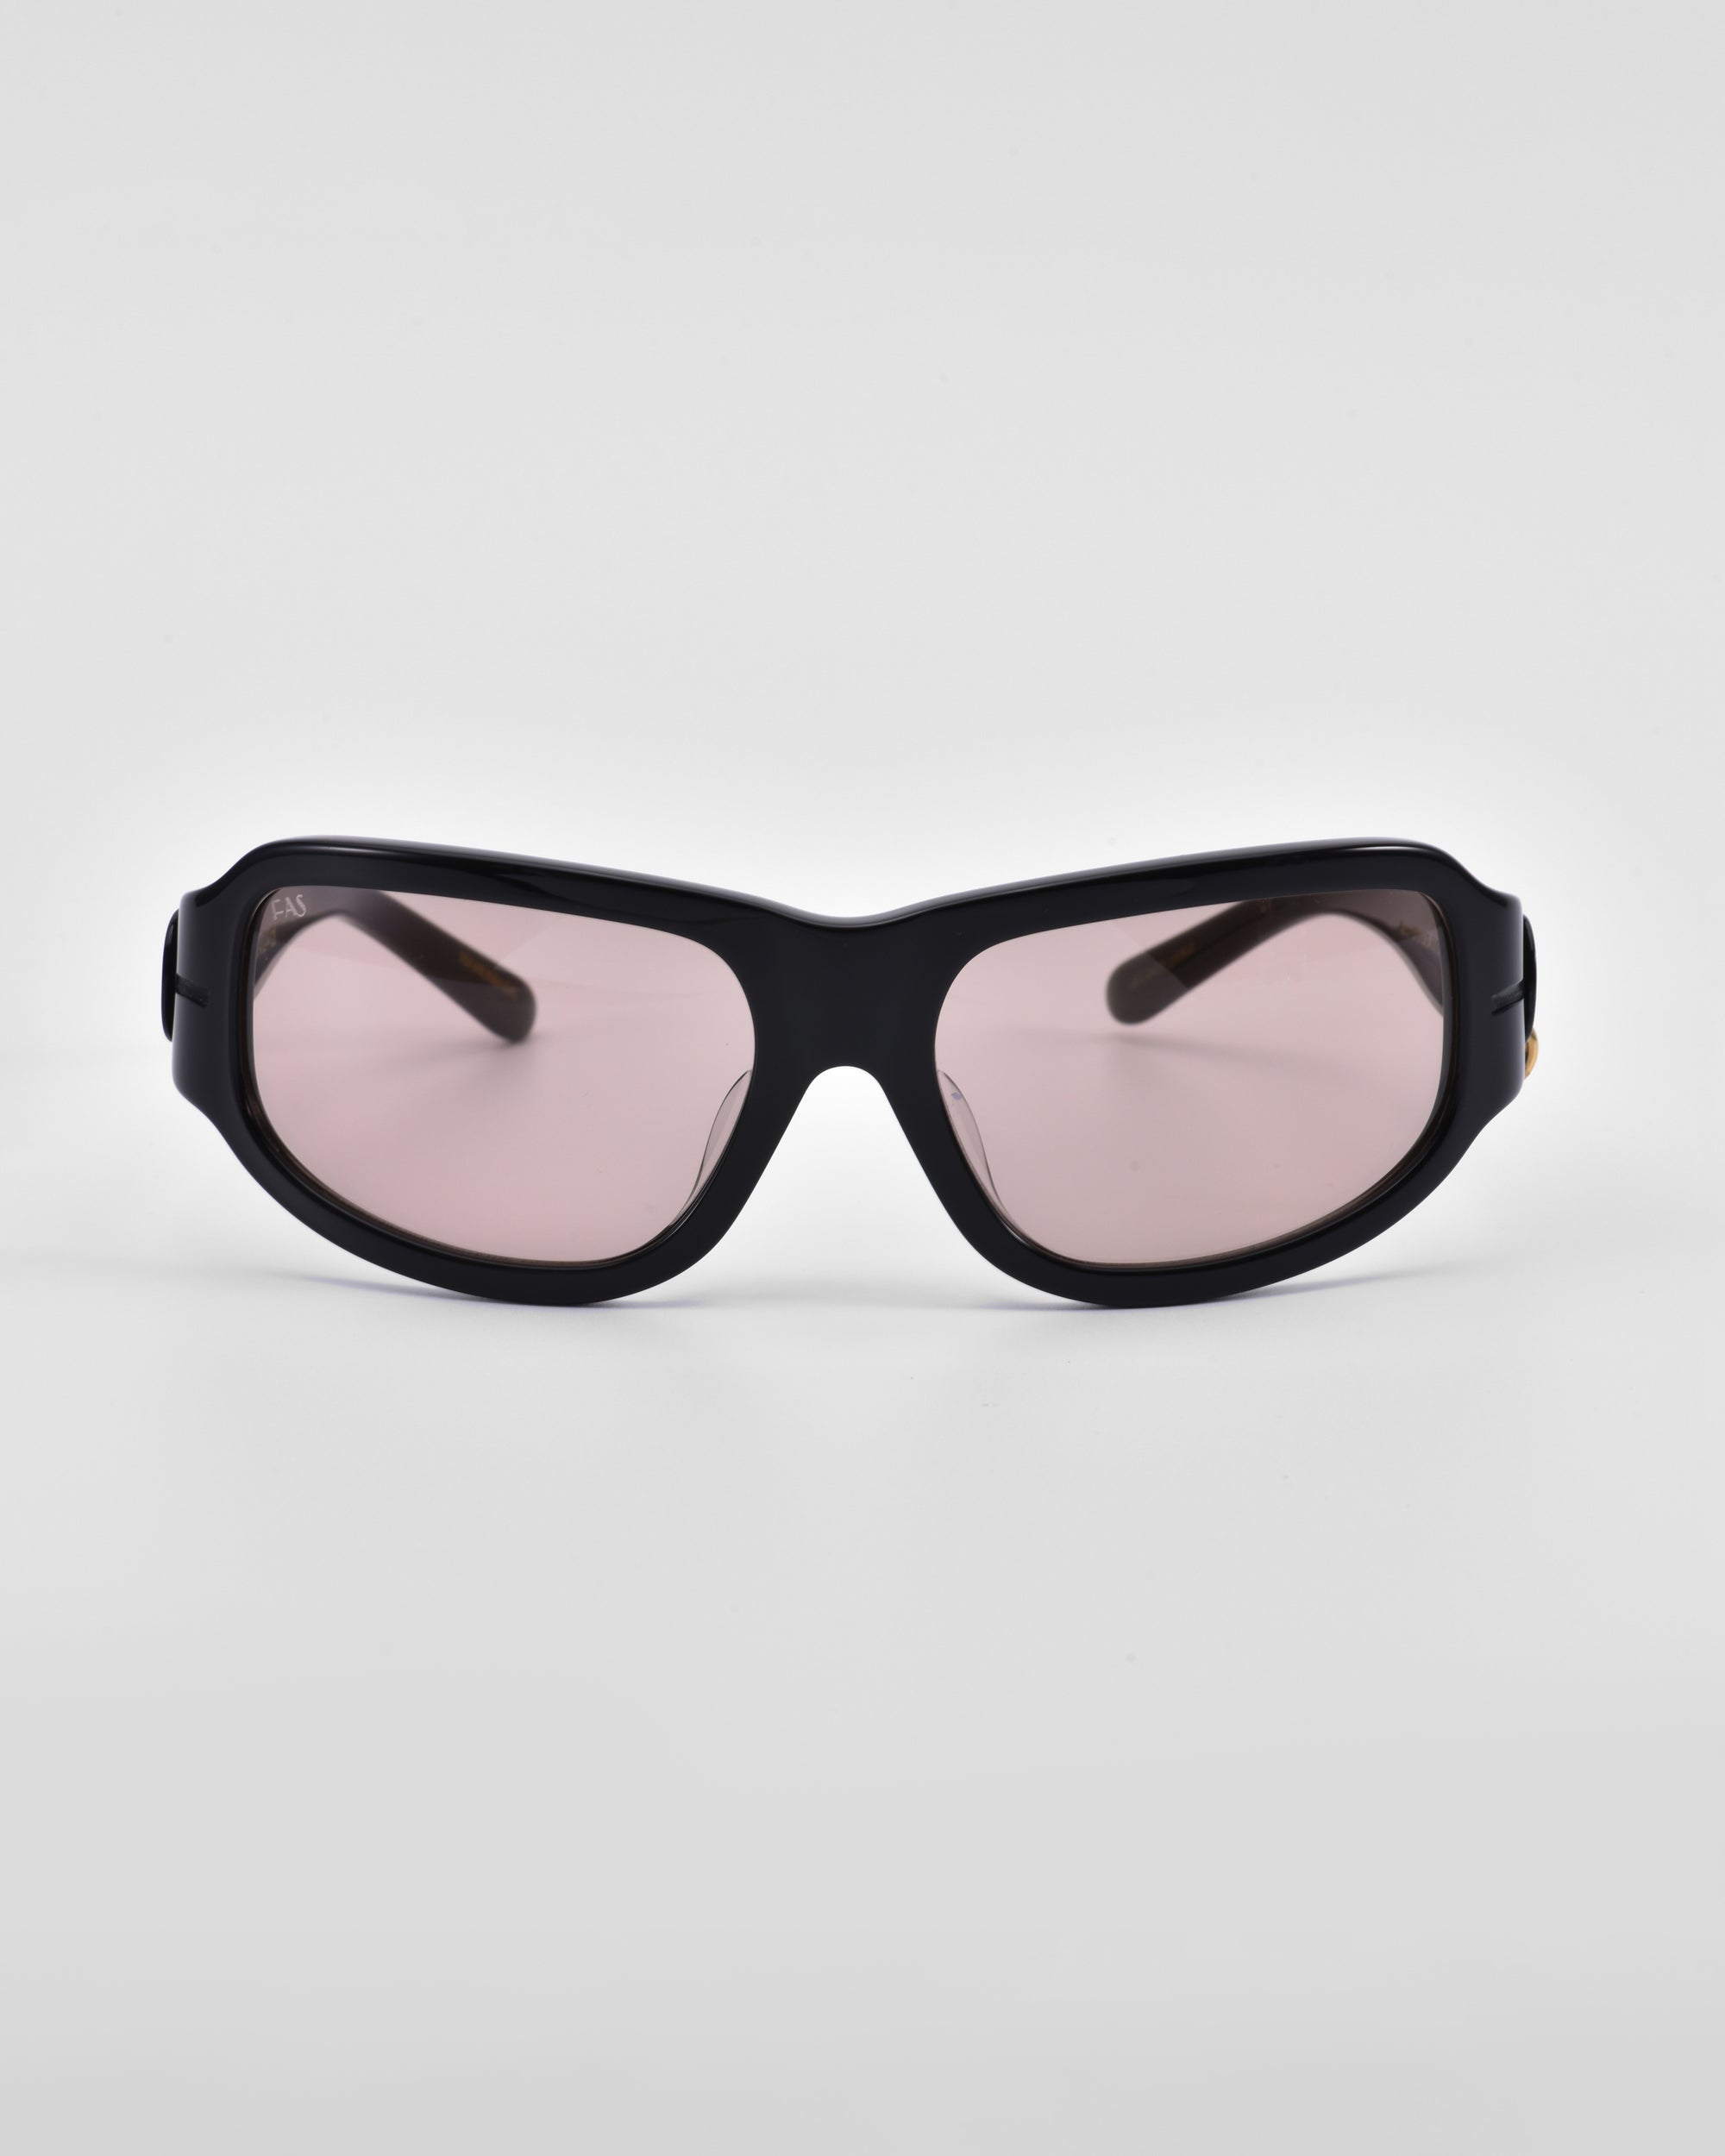 A pair of black-framed For Art's Sake® Raven sunglasses with tinted lenses is shown against a plain white background. The design features a sleek, angular shape with slightly rounded edges, and the lenses appear to have a subtle pinkish tint.